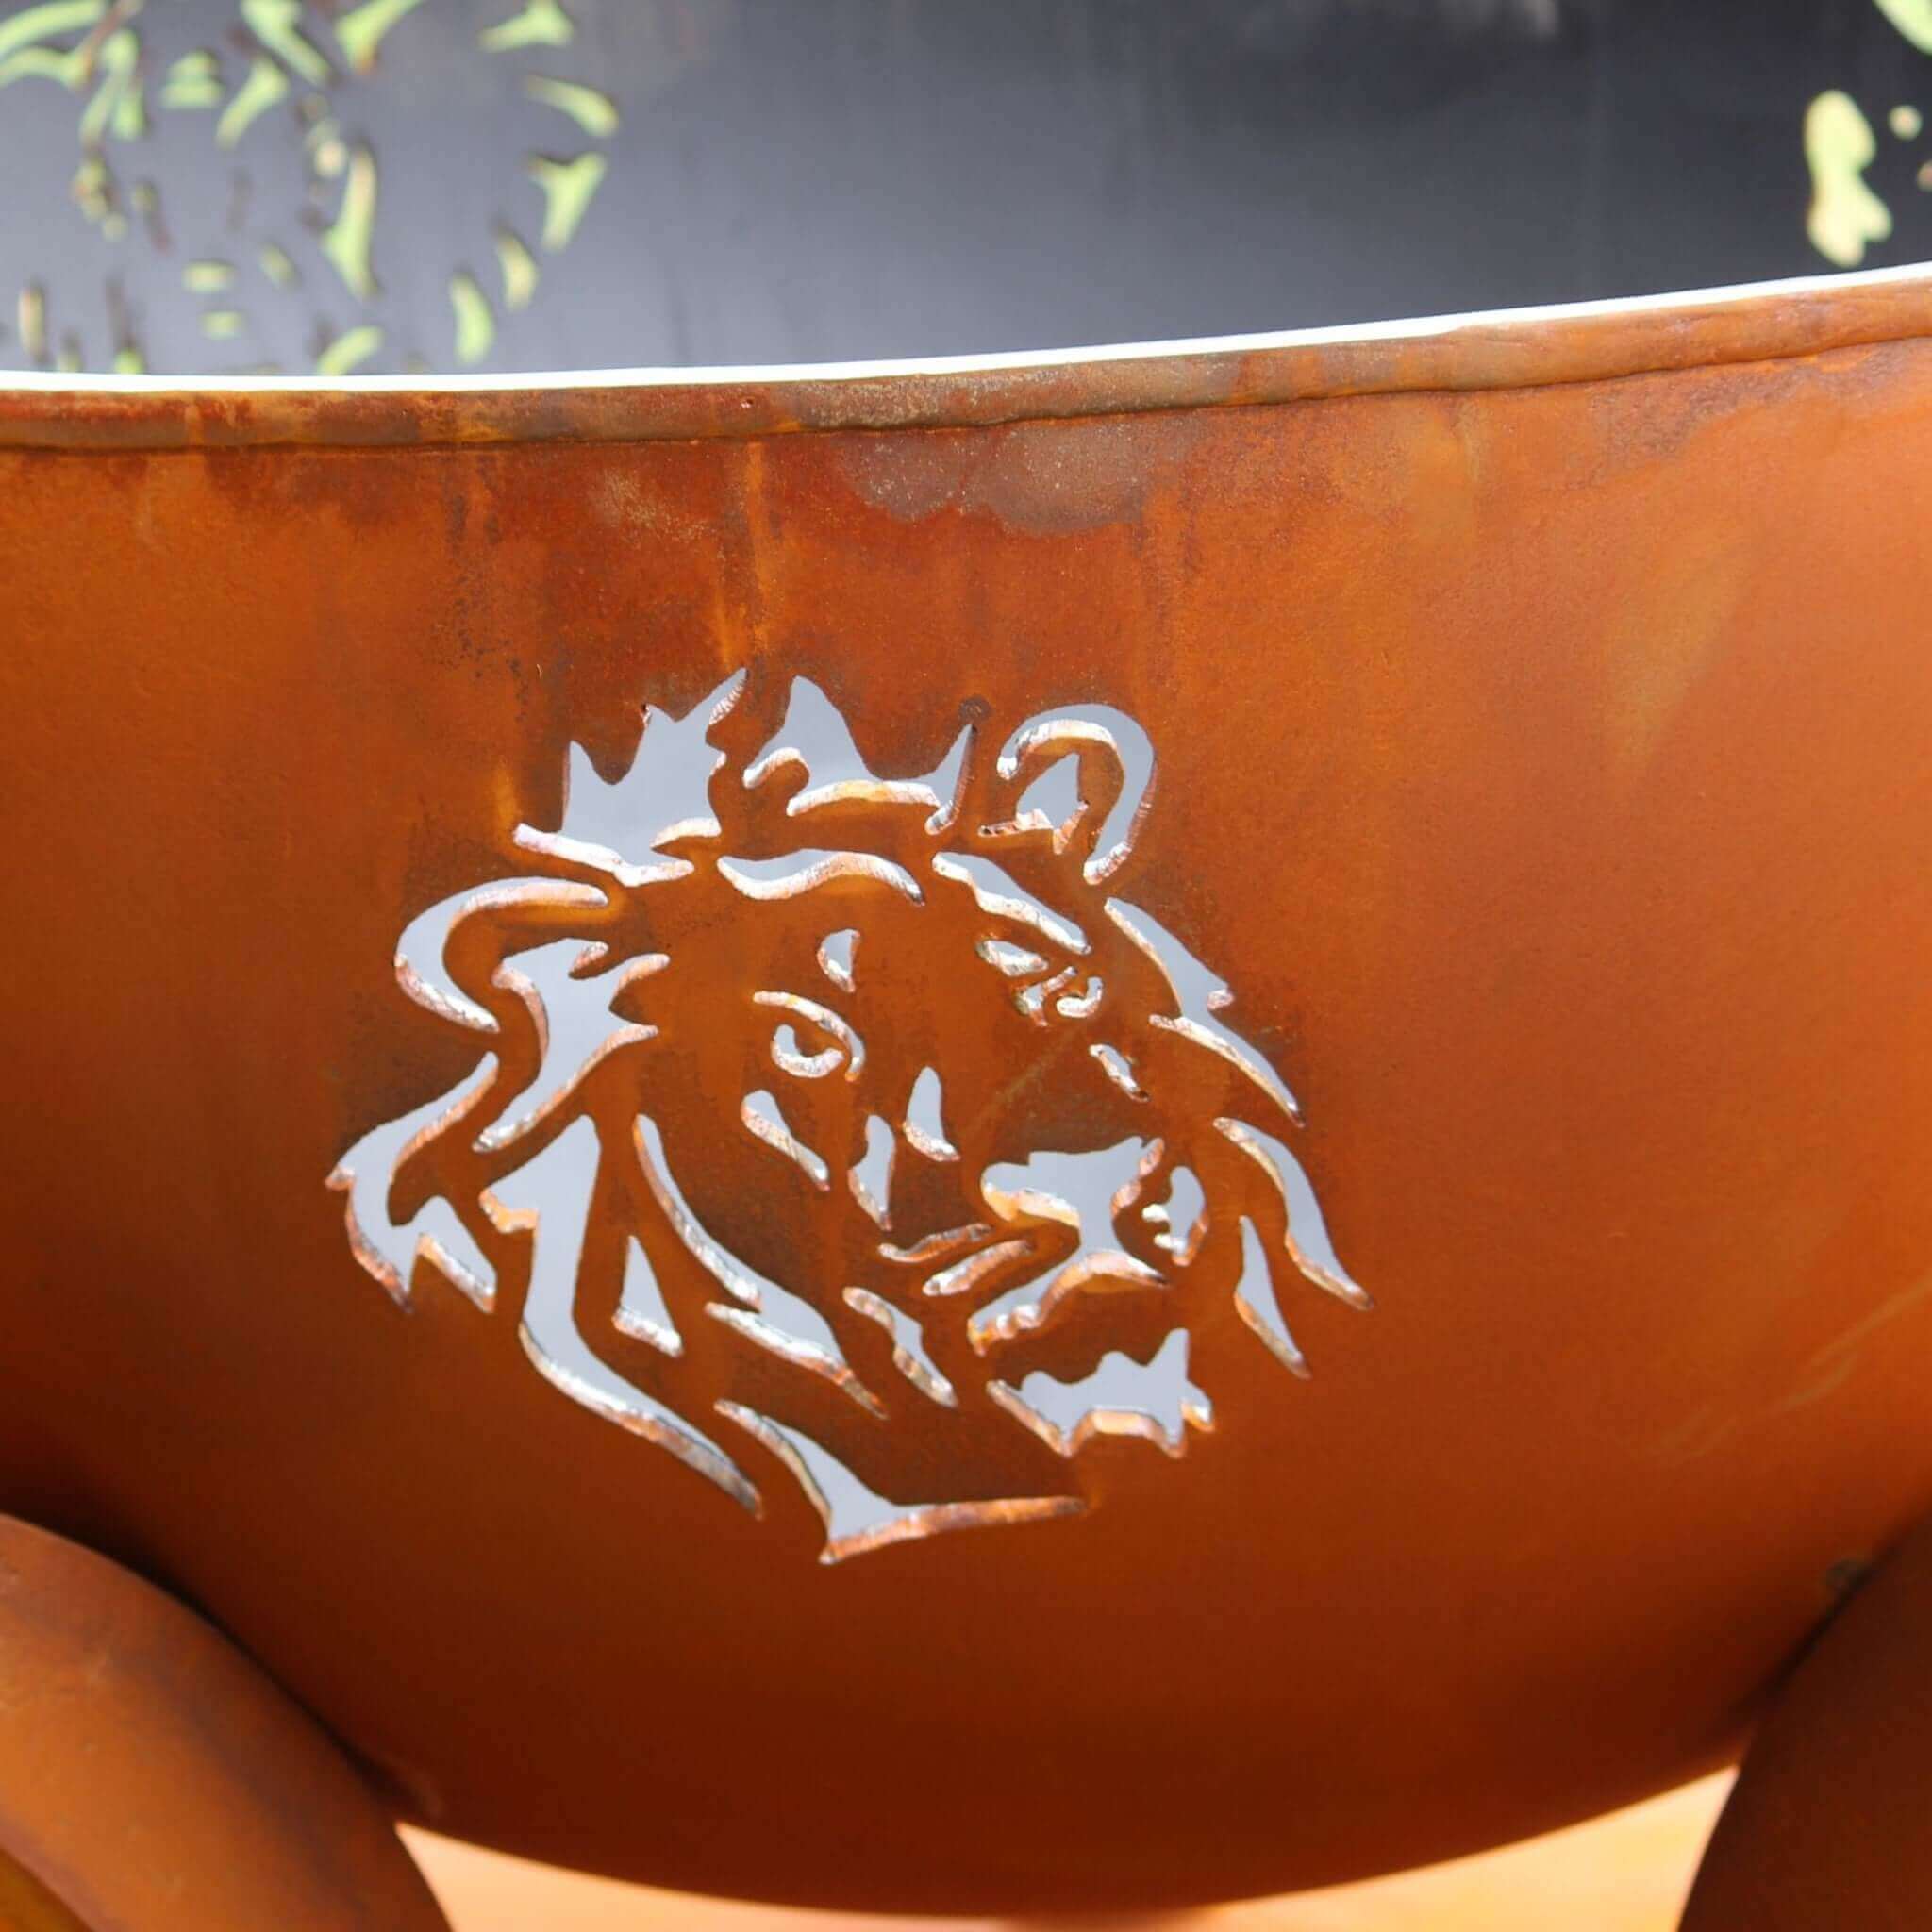 "Africa's Big Five" Wood Burning Fire Pit in Steel - Fire Pit Art